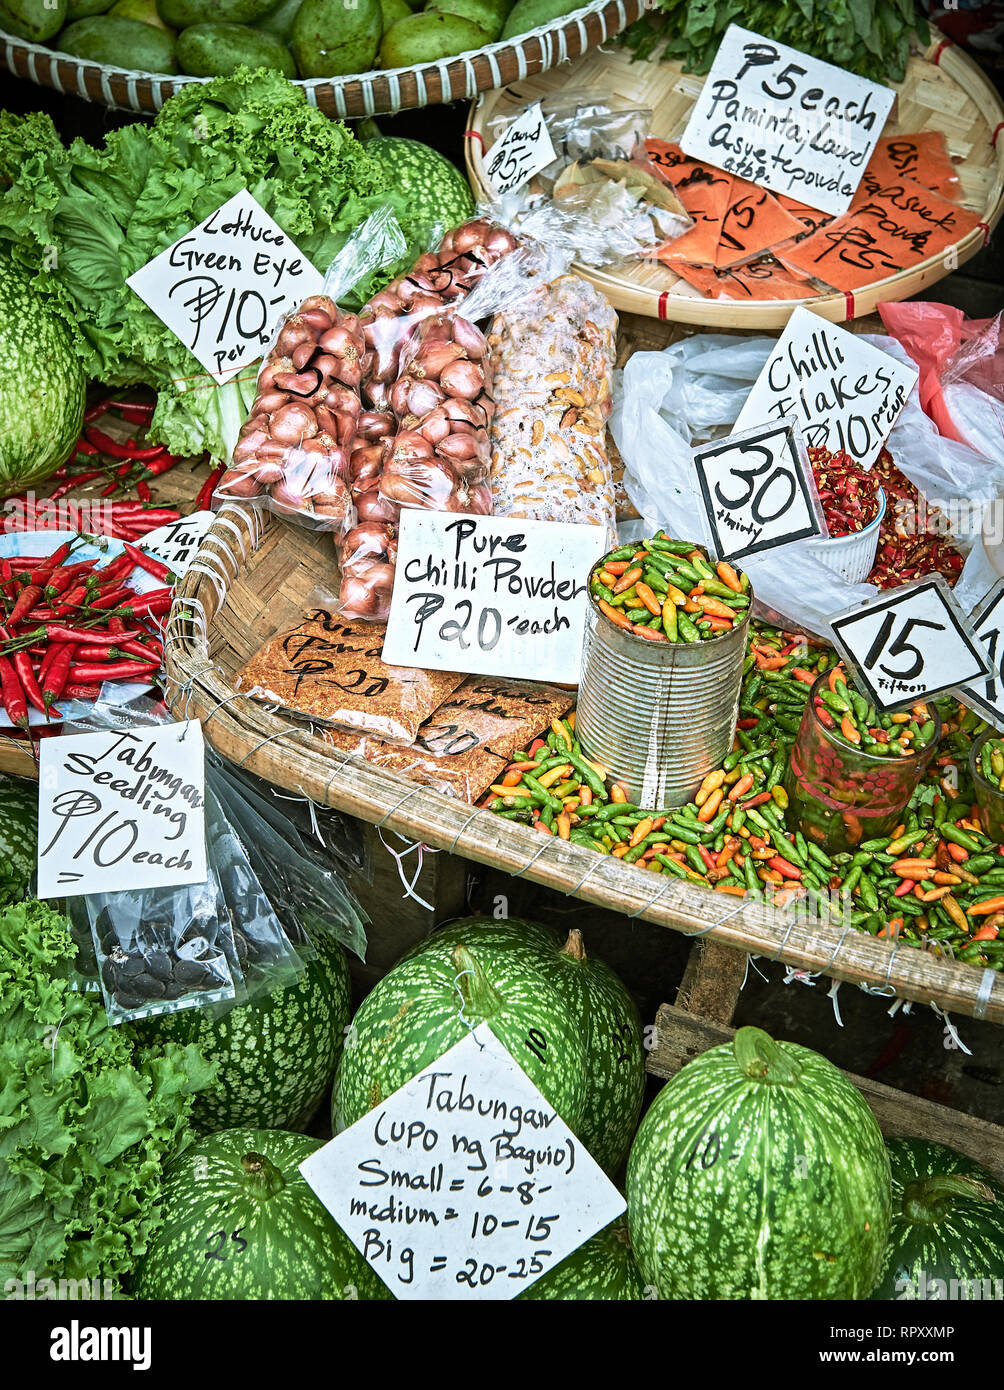 Mixed vegetables, fruits and spices nicely presented with price signage at the Central Market in Baguio City, Benguet Province, Philippines Stock Photo